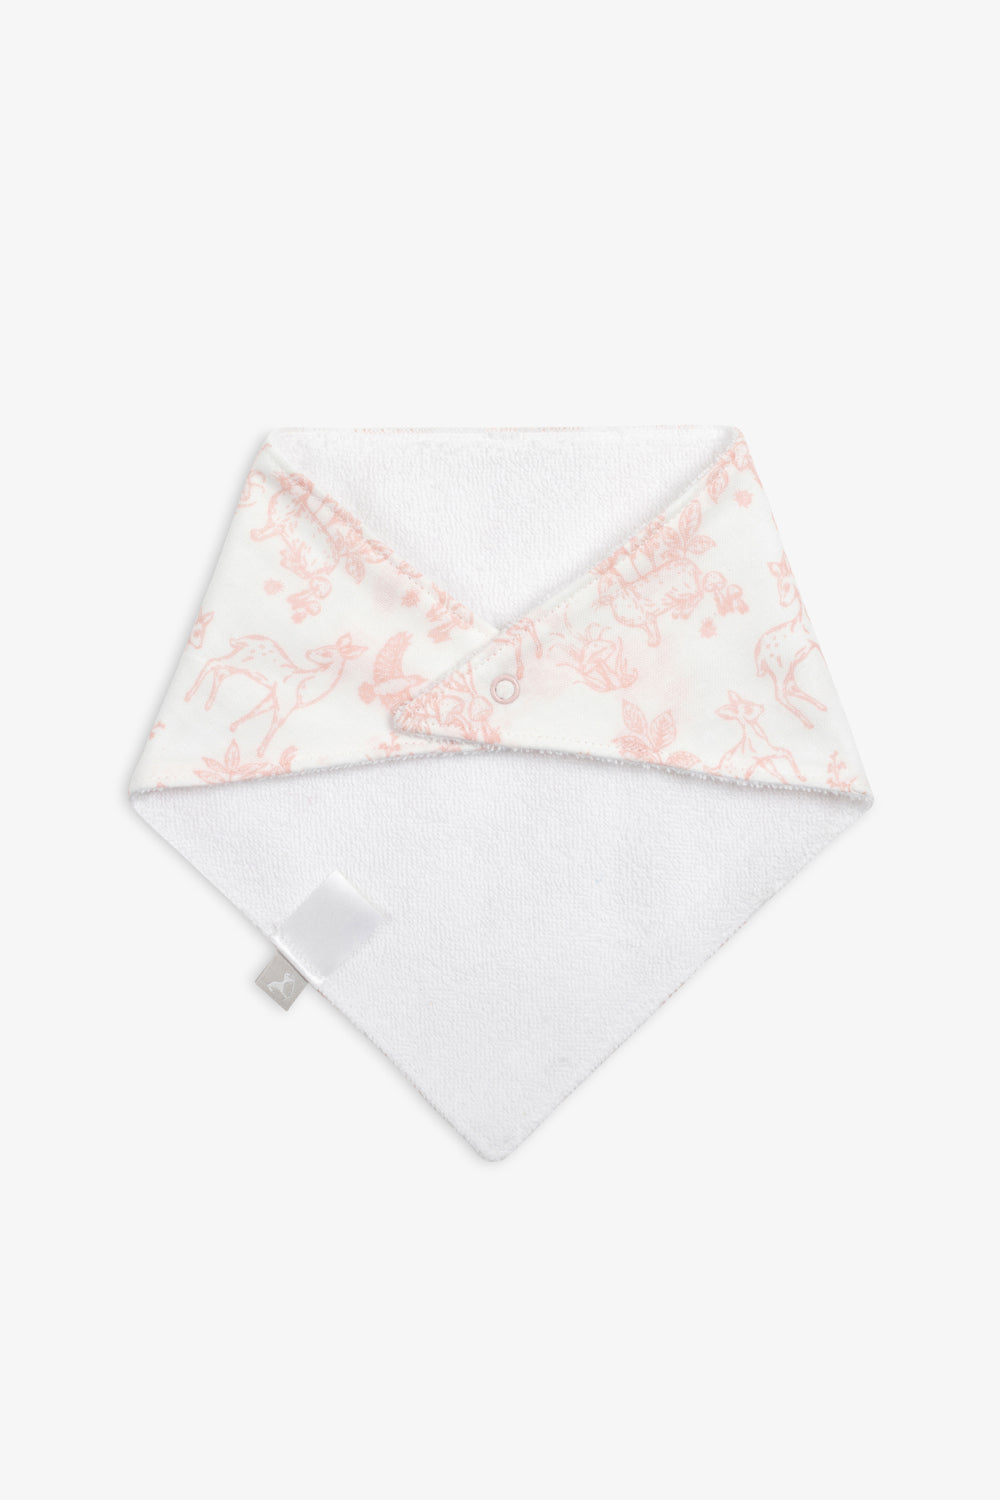 Muslin 2pk Towelling Backed Bib, pink woodland and pink gingham print